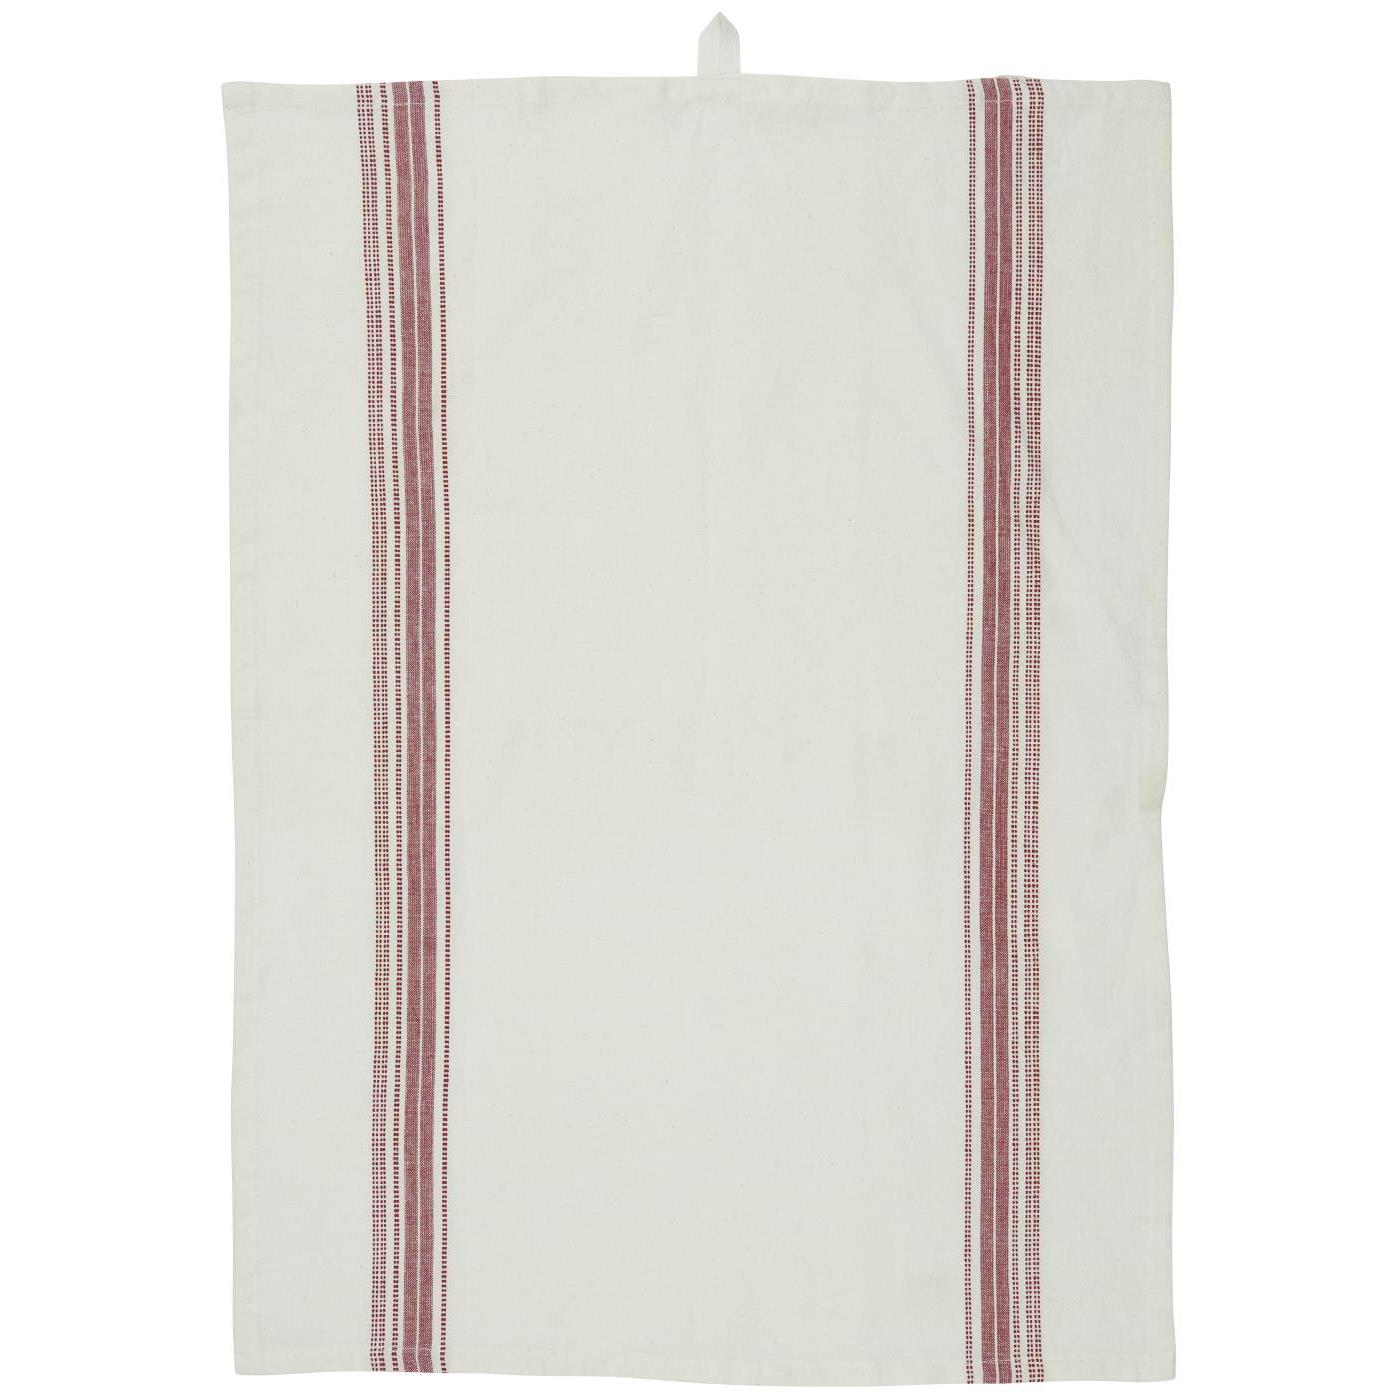 Tea towel white and red